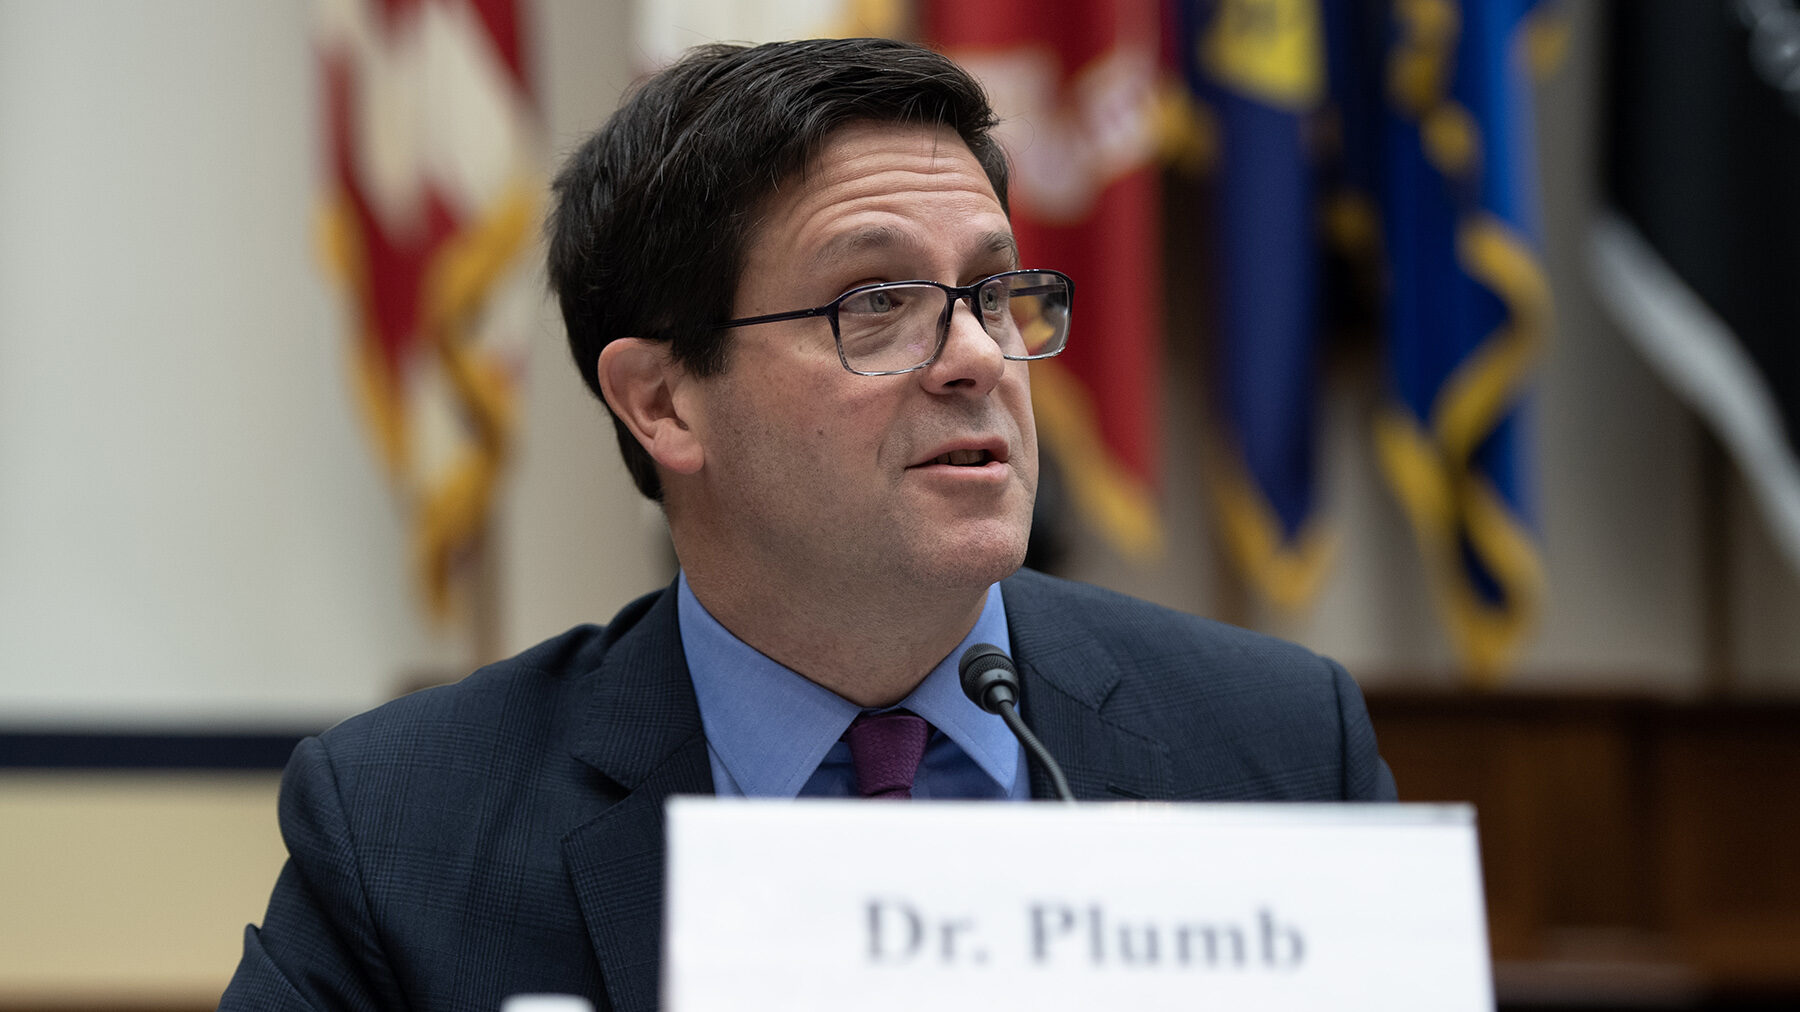 John Plumb, key DoD space official, to exit